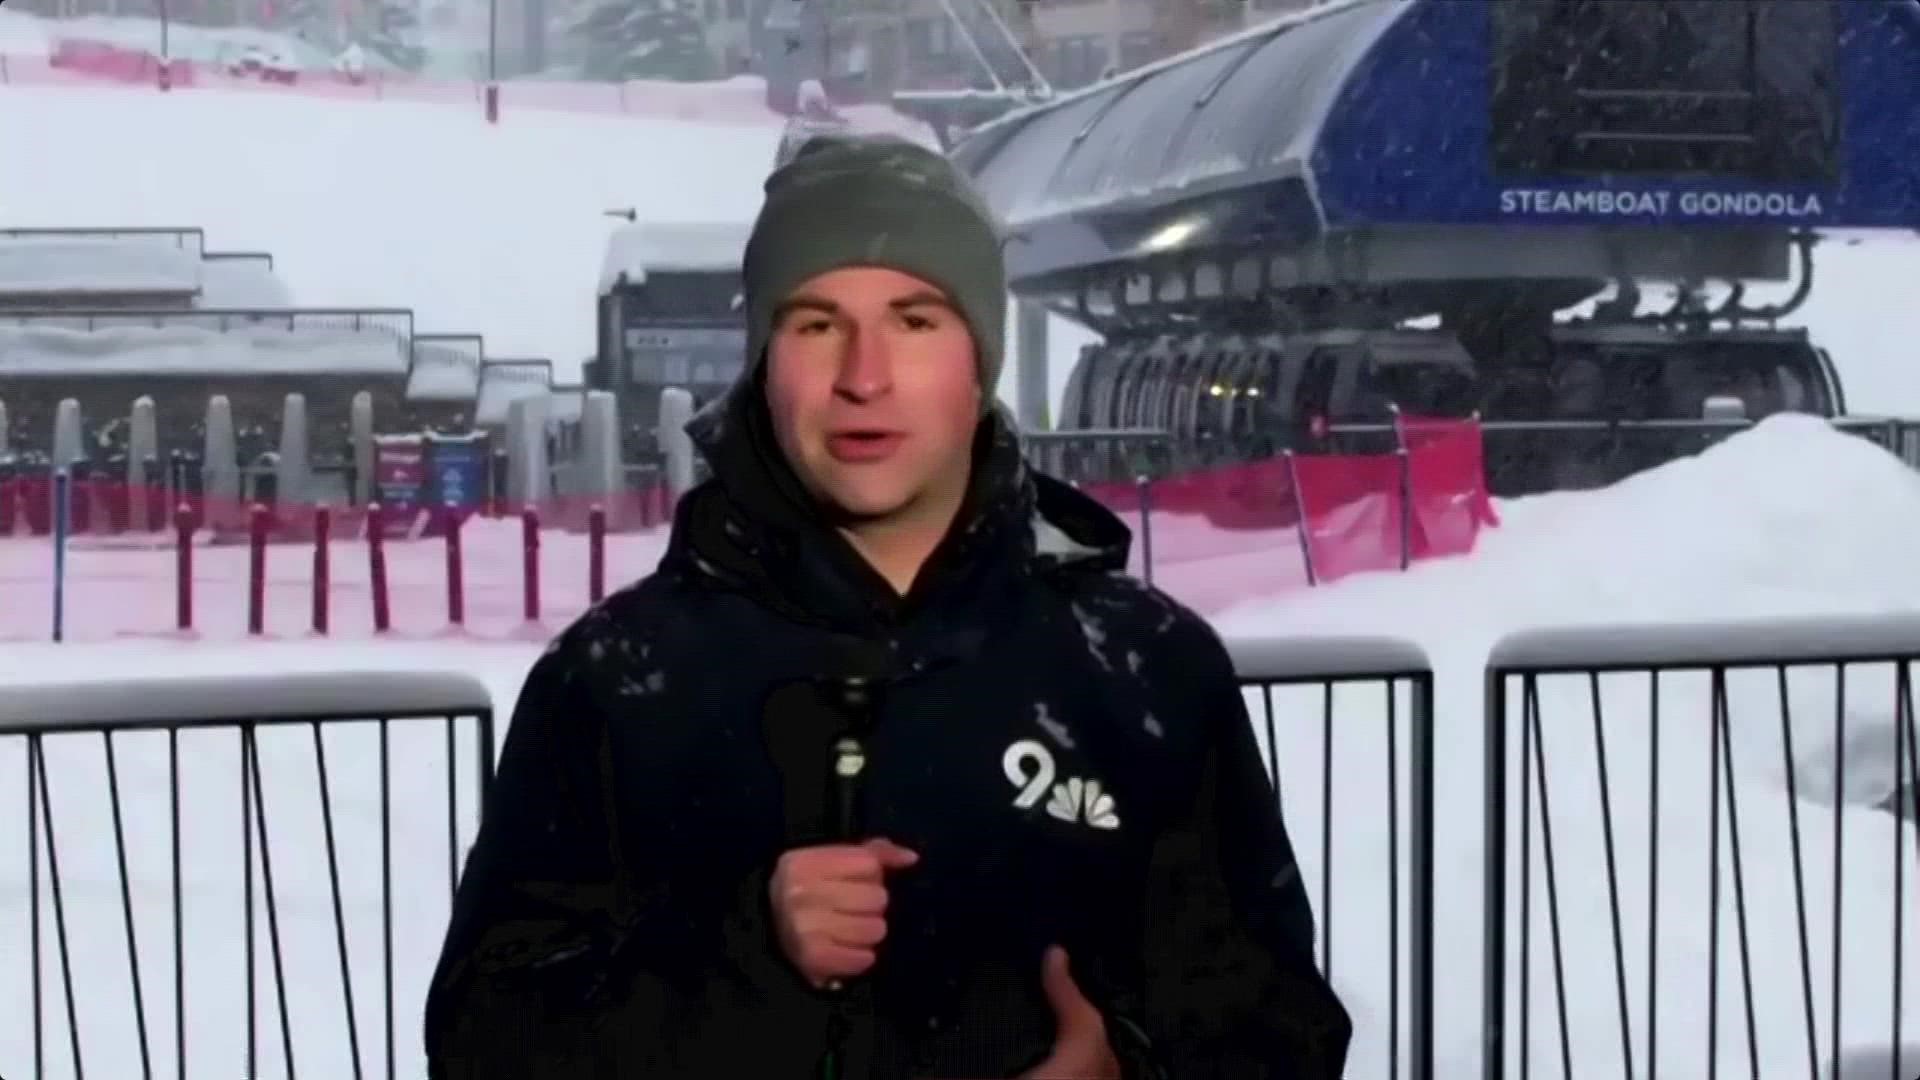 All this snow is good for skiers and snowboarders especially up at Steamboat Springs. Meteorologist Chris Bianchi is up there but didn't get to enjoy the powder day.